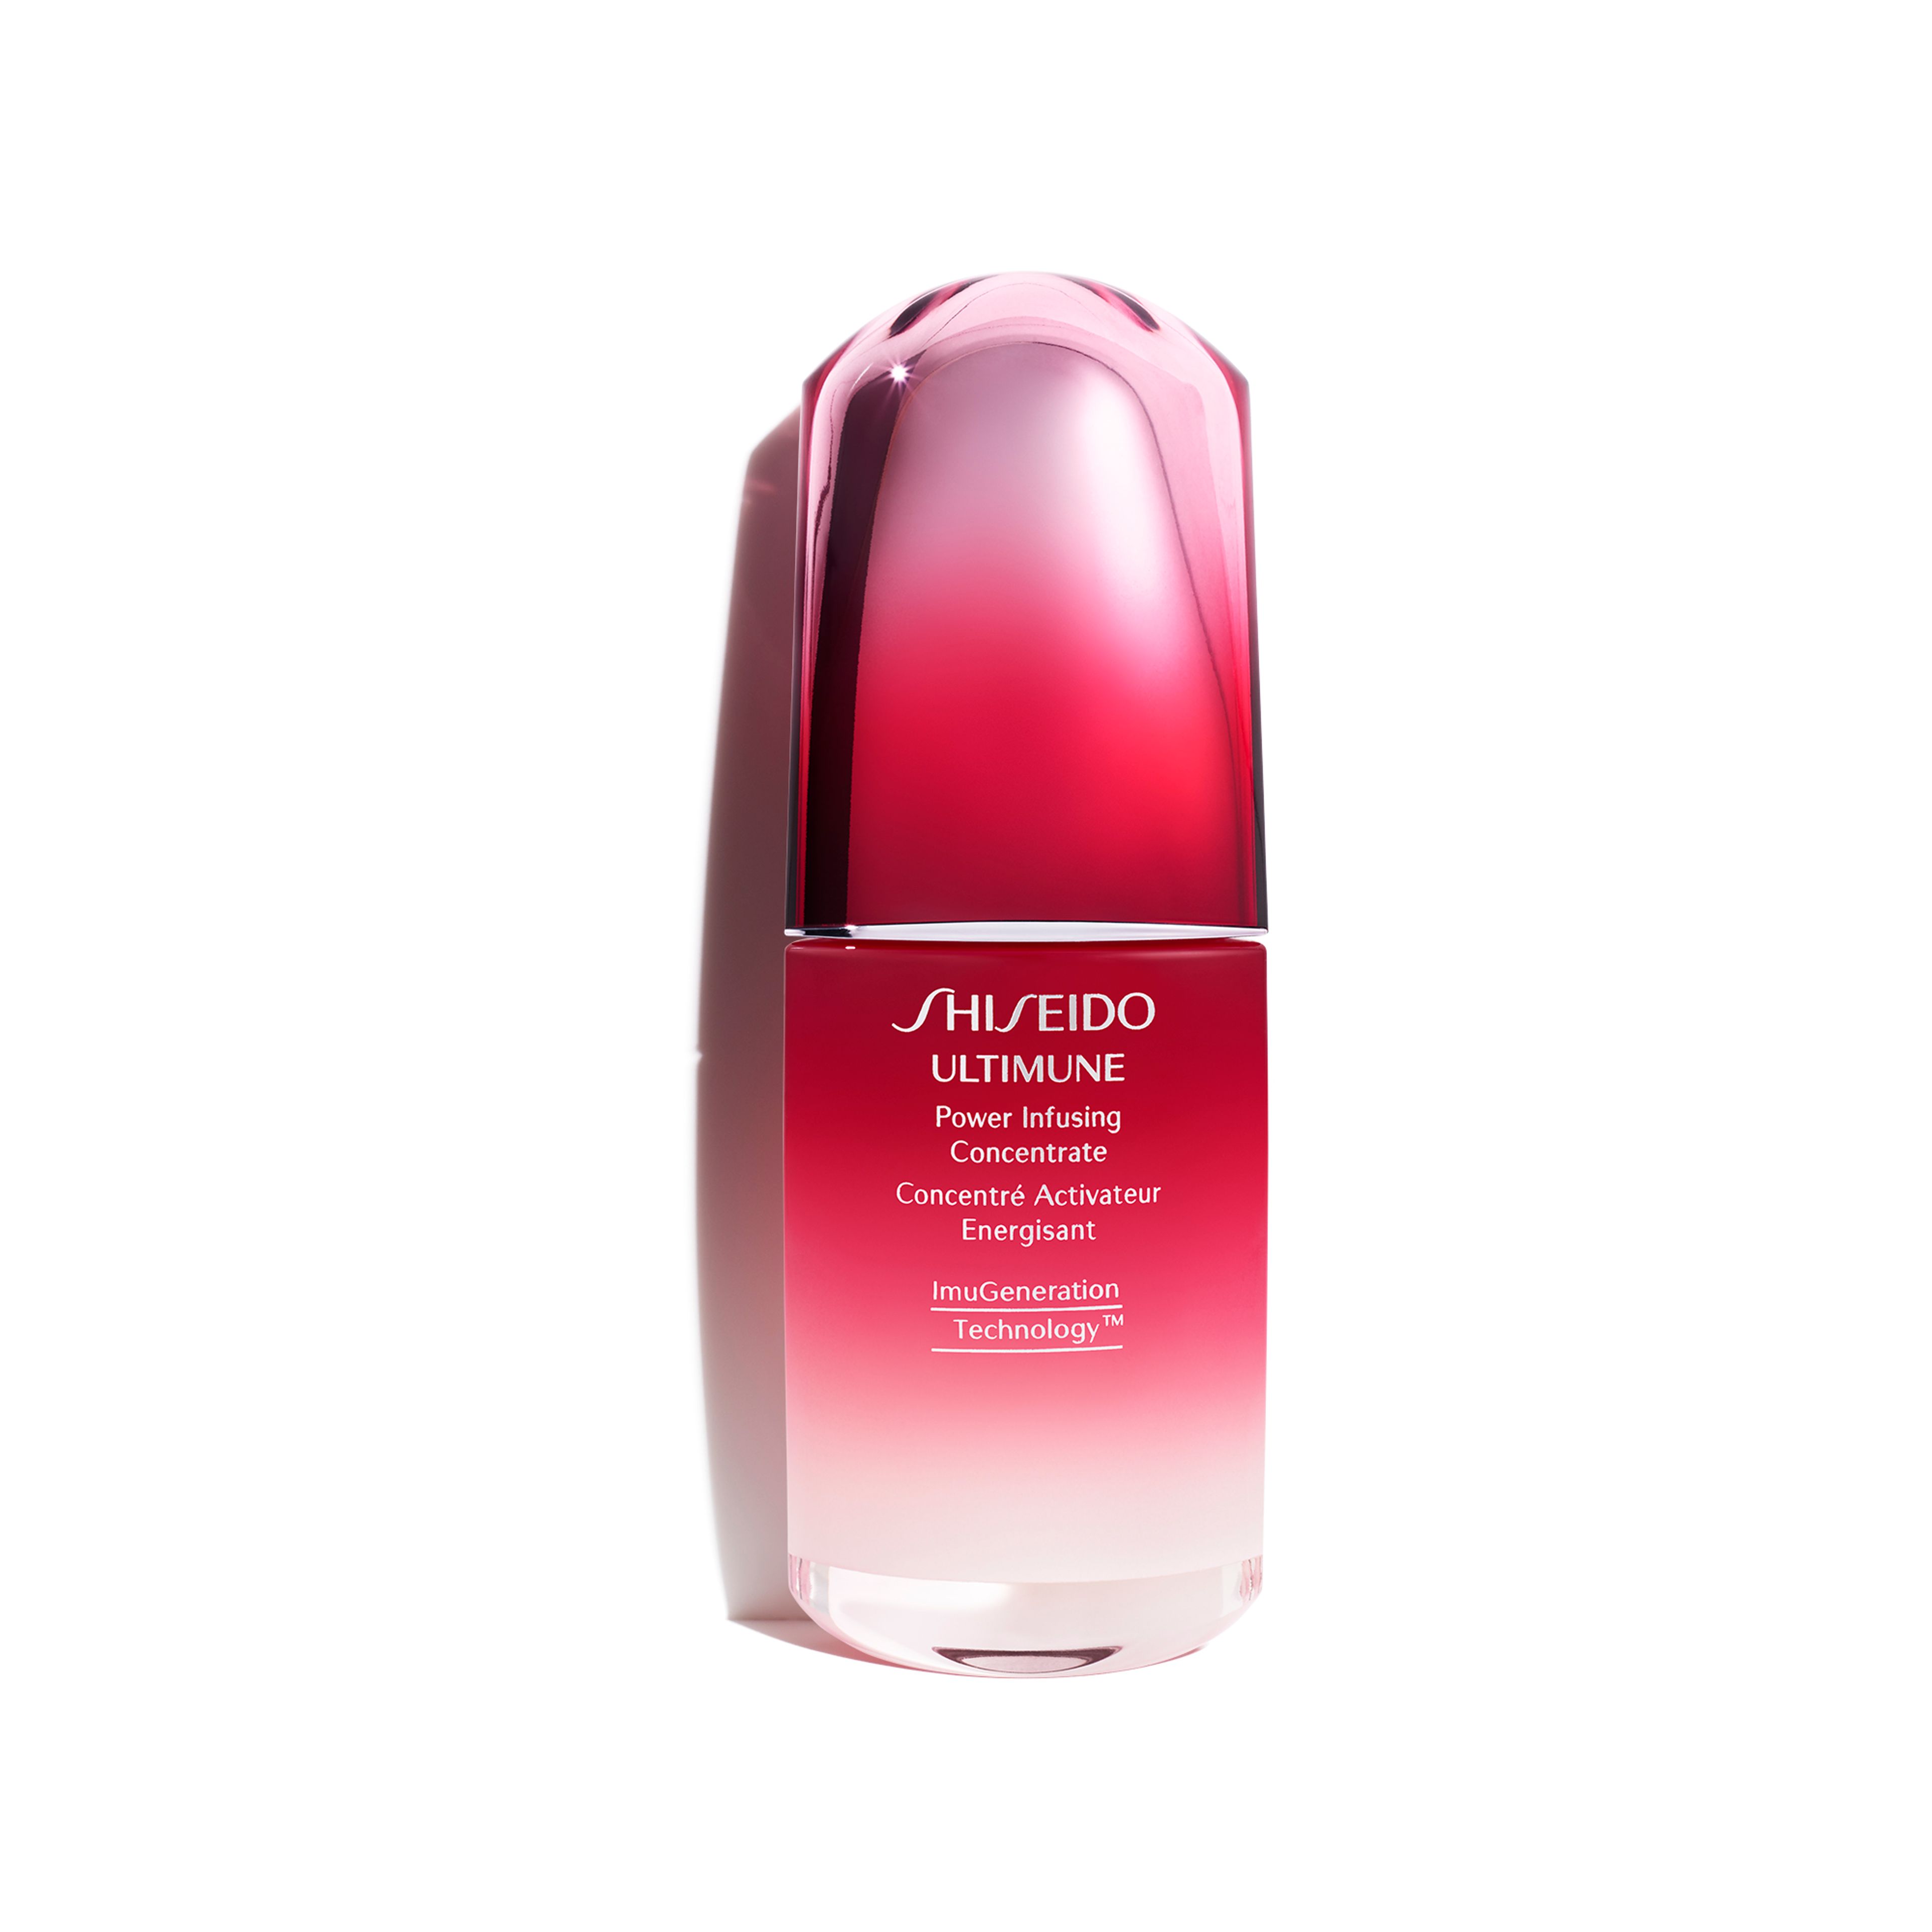 Ultimune Power Infusing Concentrate Shiseido 1